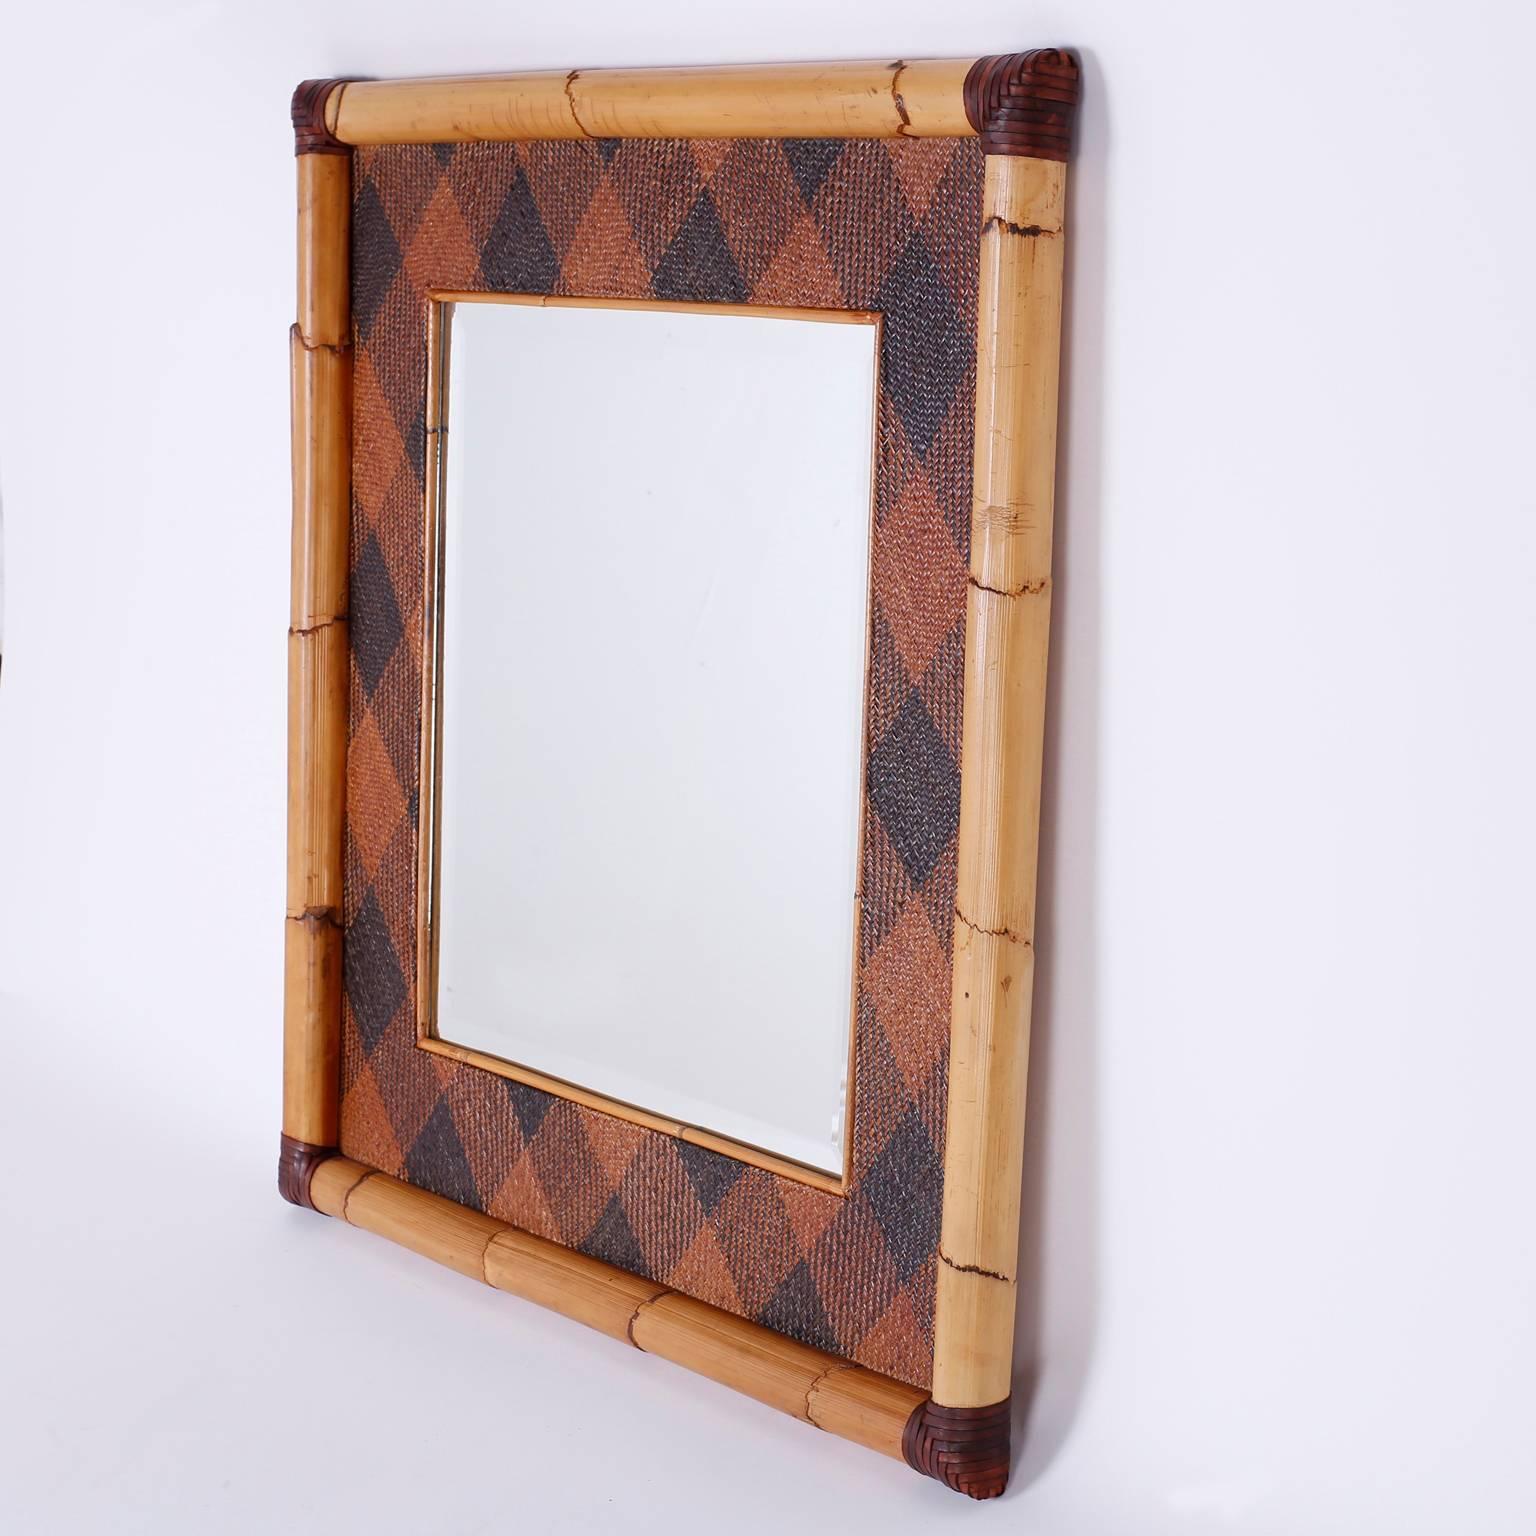 Handsome mirror in a frame crafted with bamboo and wrapped at the corners in an unusual argyle wicker pattern. The mirror is beveled. Stamped on the back Mackenzie Childs 1983.